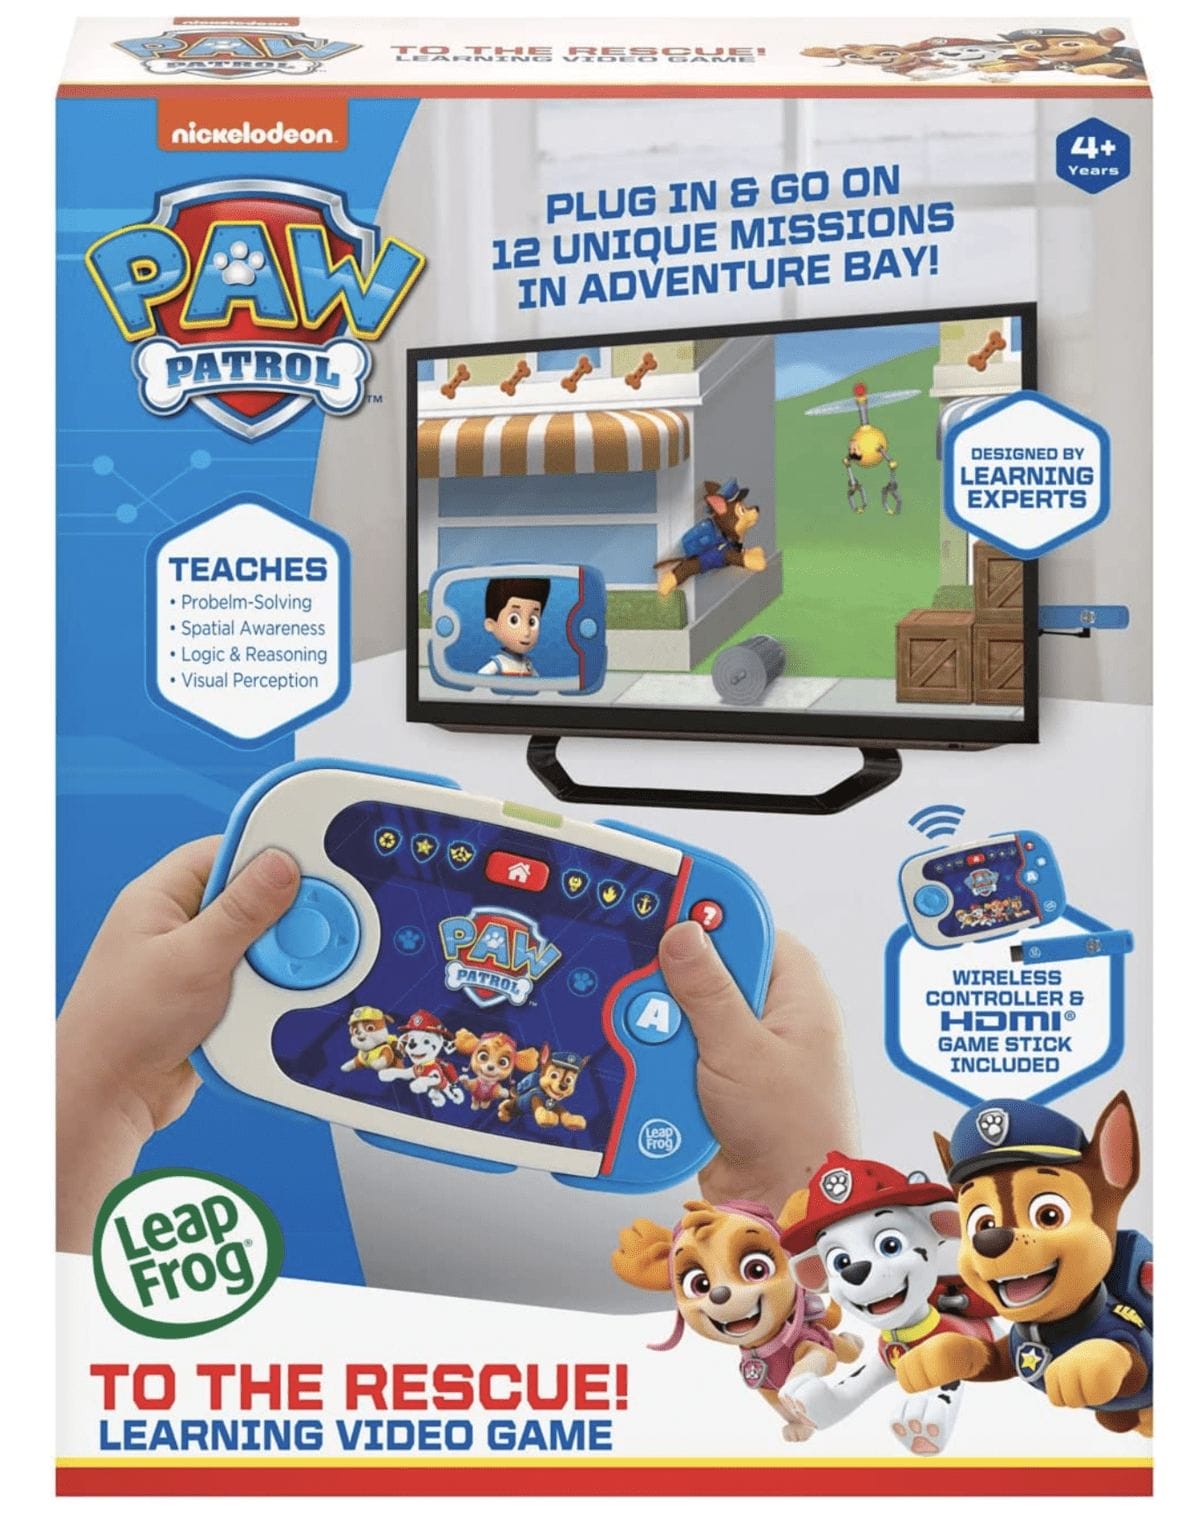 paw patrol video game gift idea for kiddos